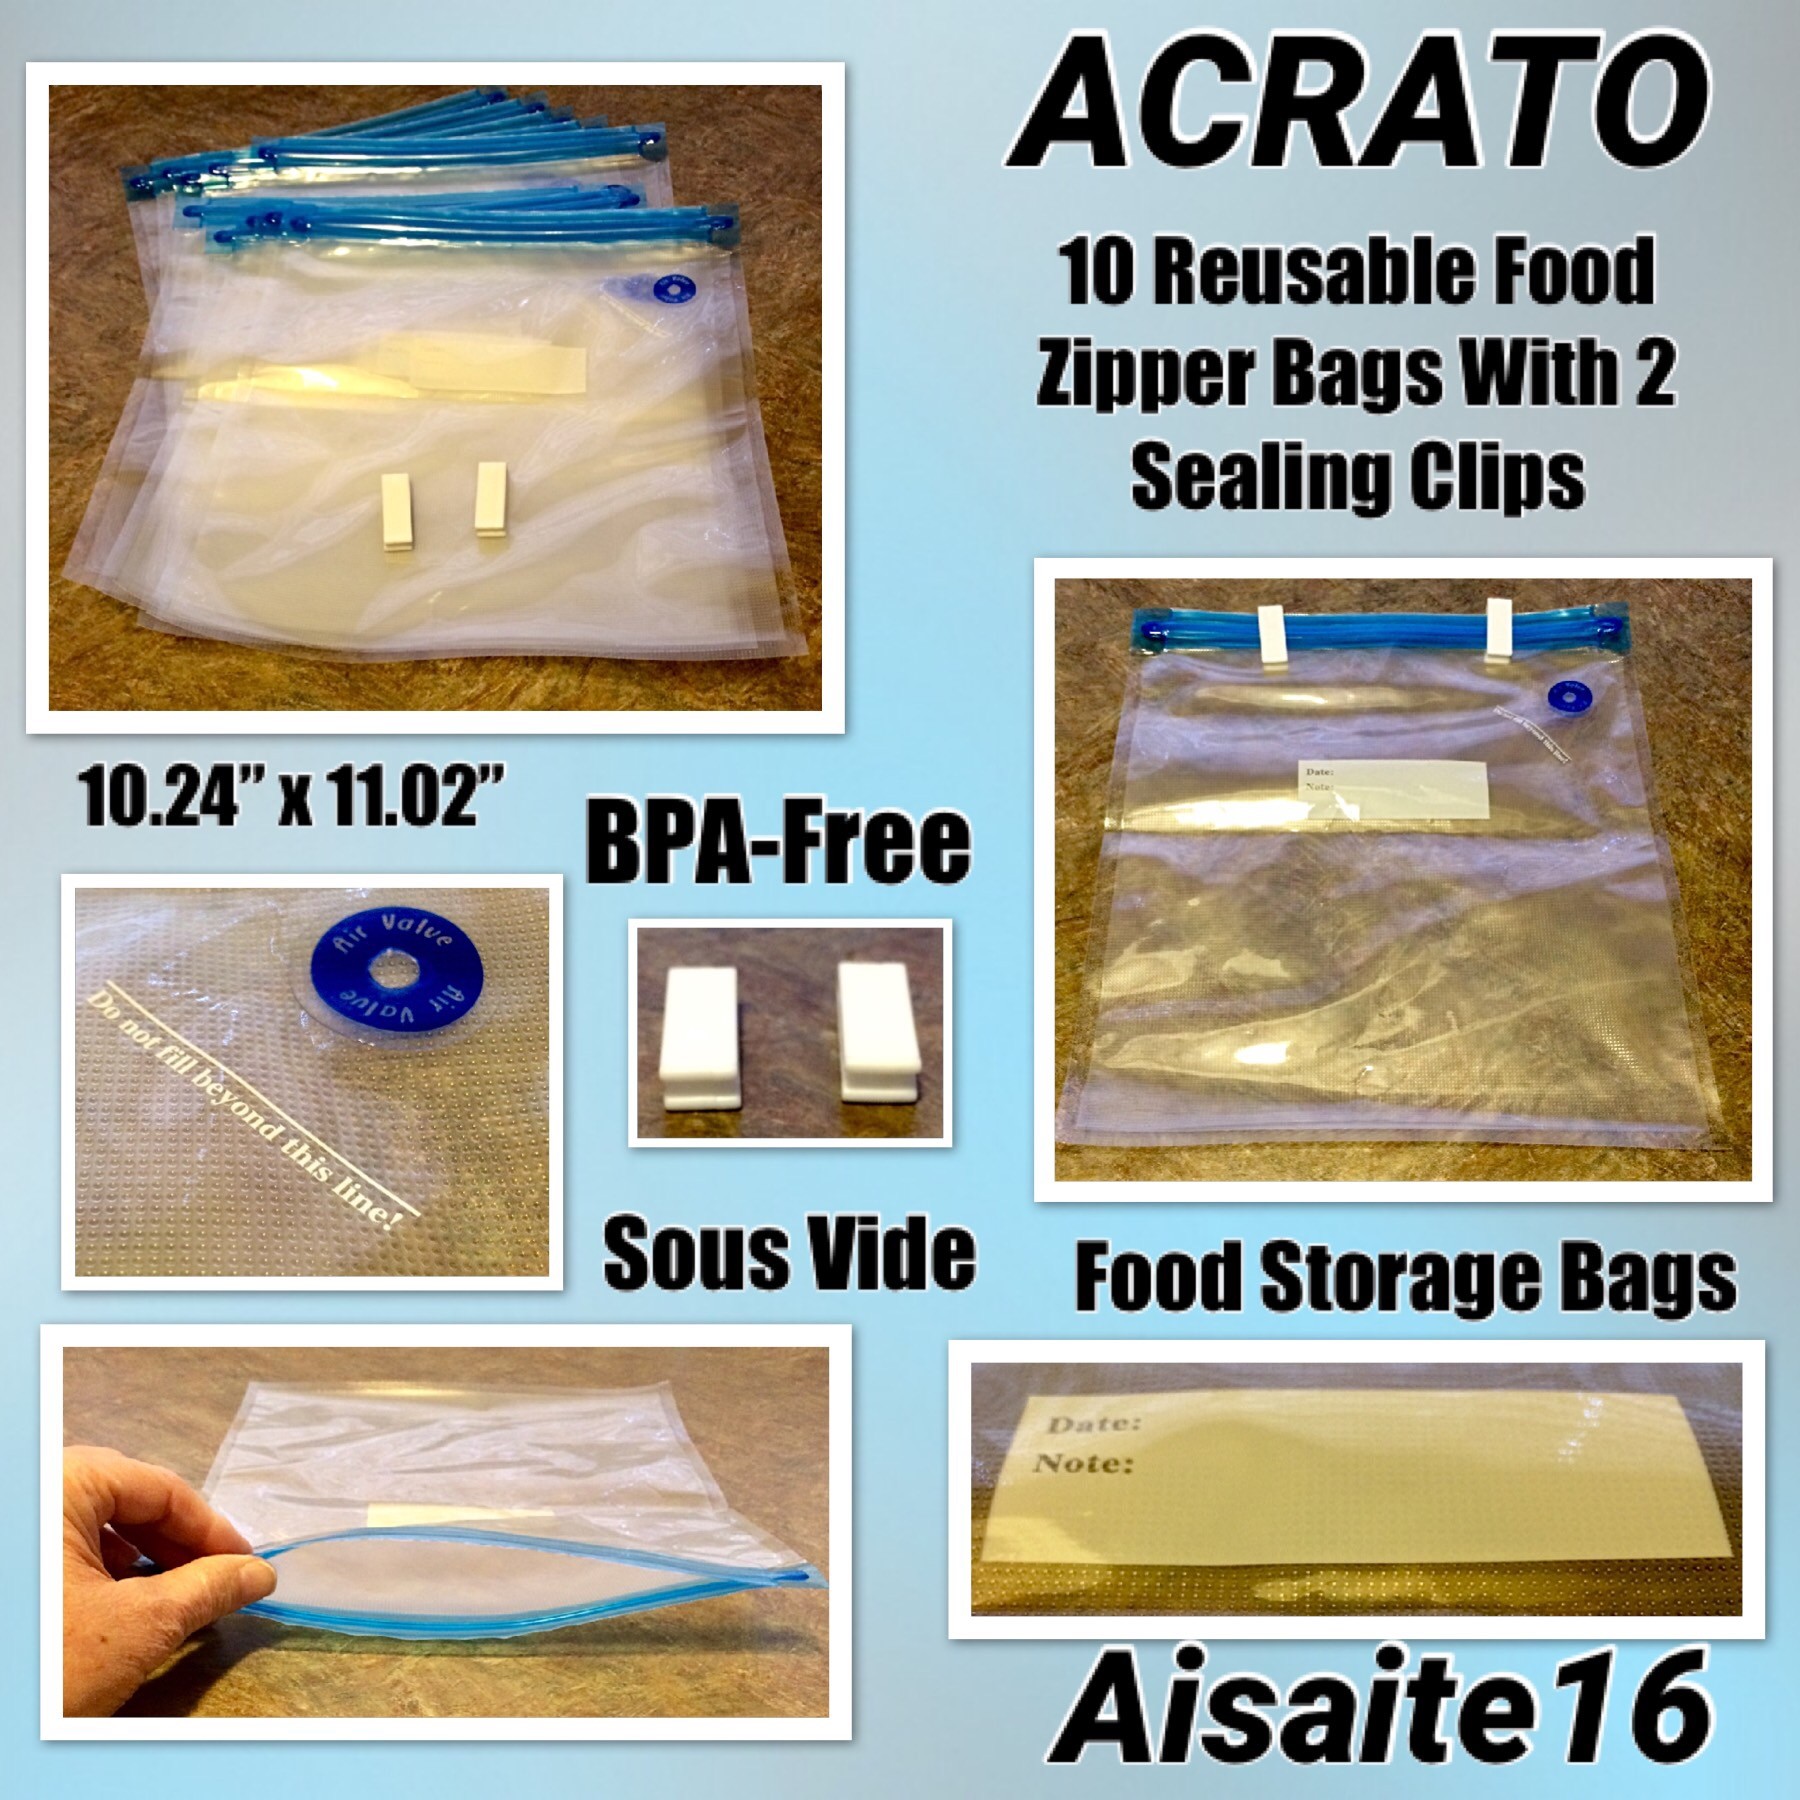 ACRATO [10 Bags] Sous Vide Bags For Immersion Circulation, ACRATO Food Storage Bags BPA-Free Reusable Food Zipper Bags With 2 Sealing Clips, Easy To Use & Enviromental-Friendly